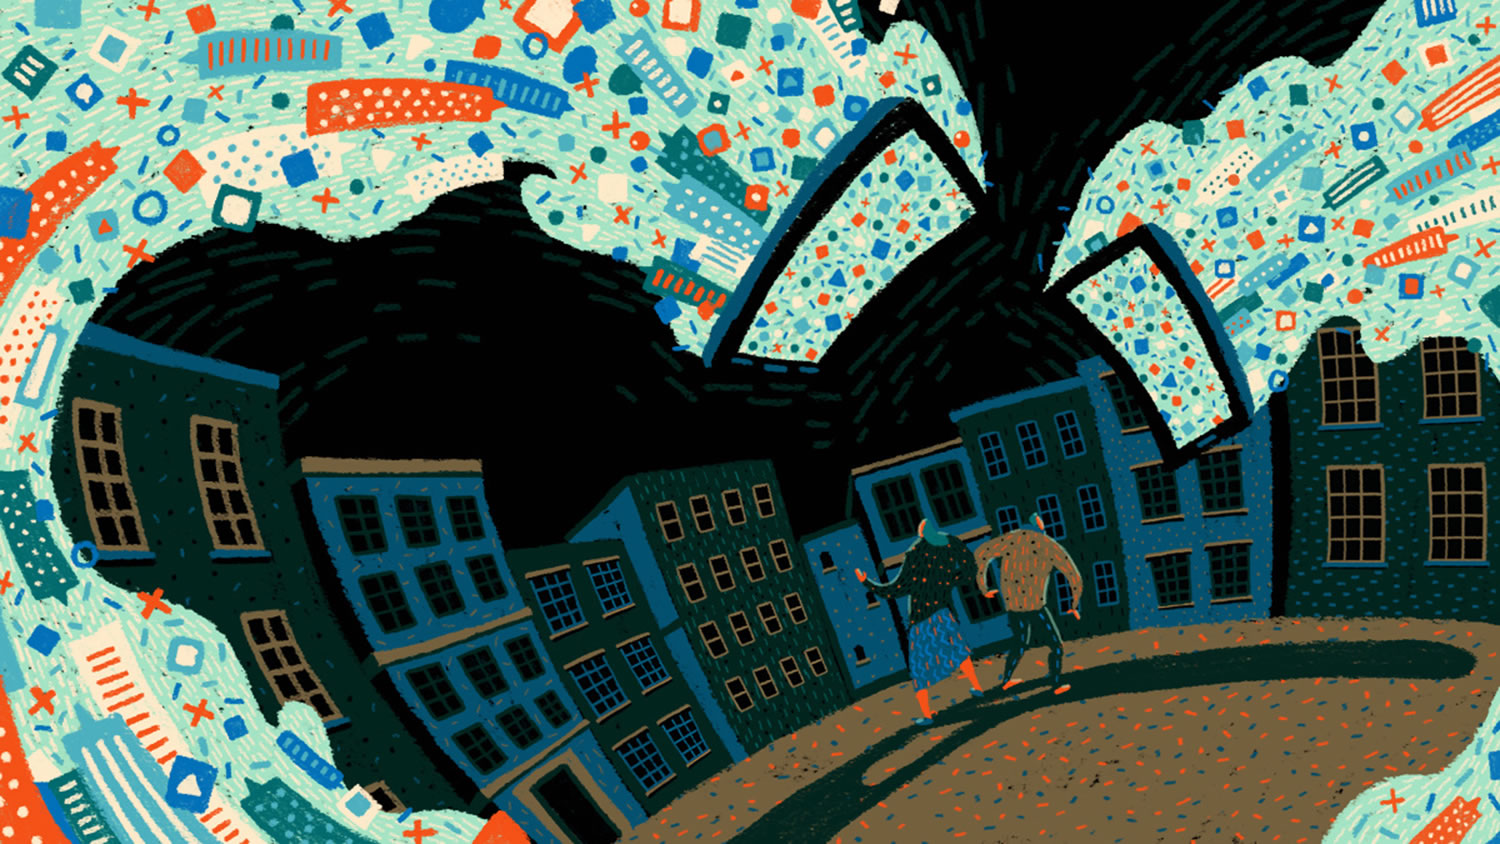 film still from way out, animated film by yukai du